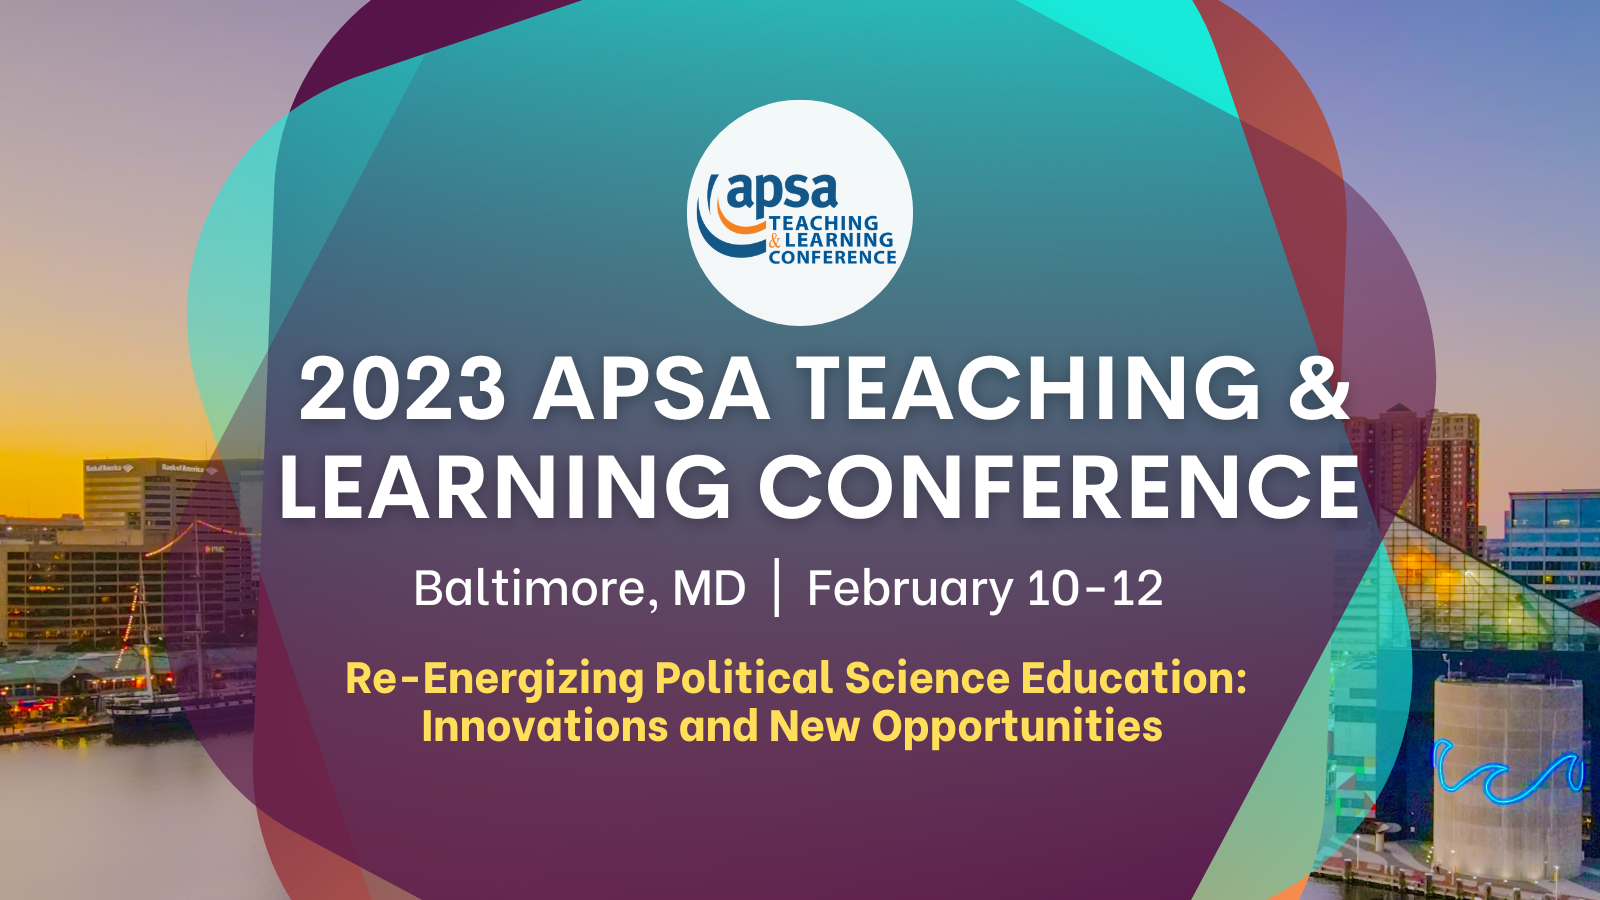 link to apsa's 2023 teaching and learning conference page